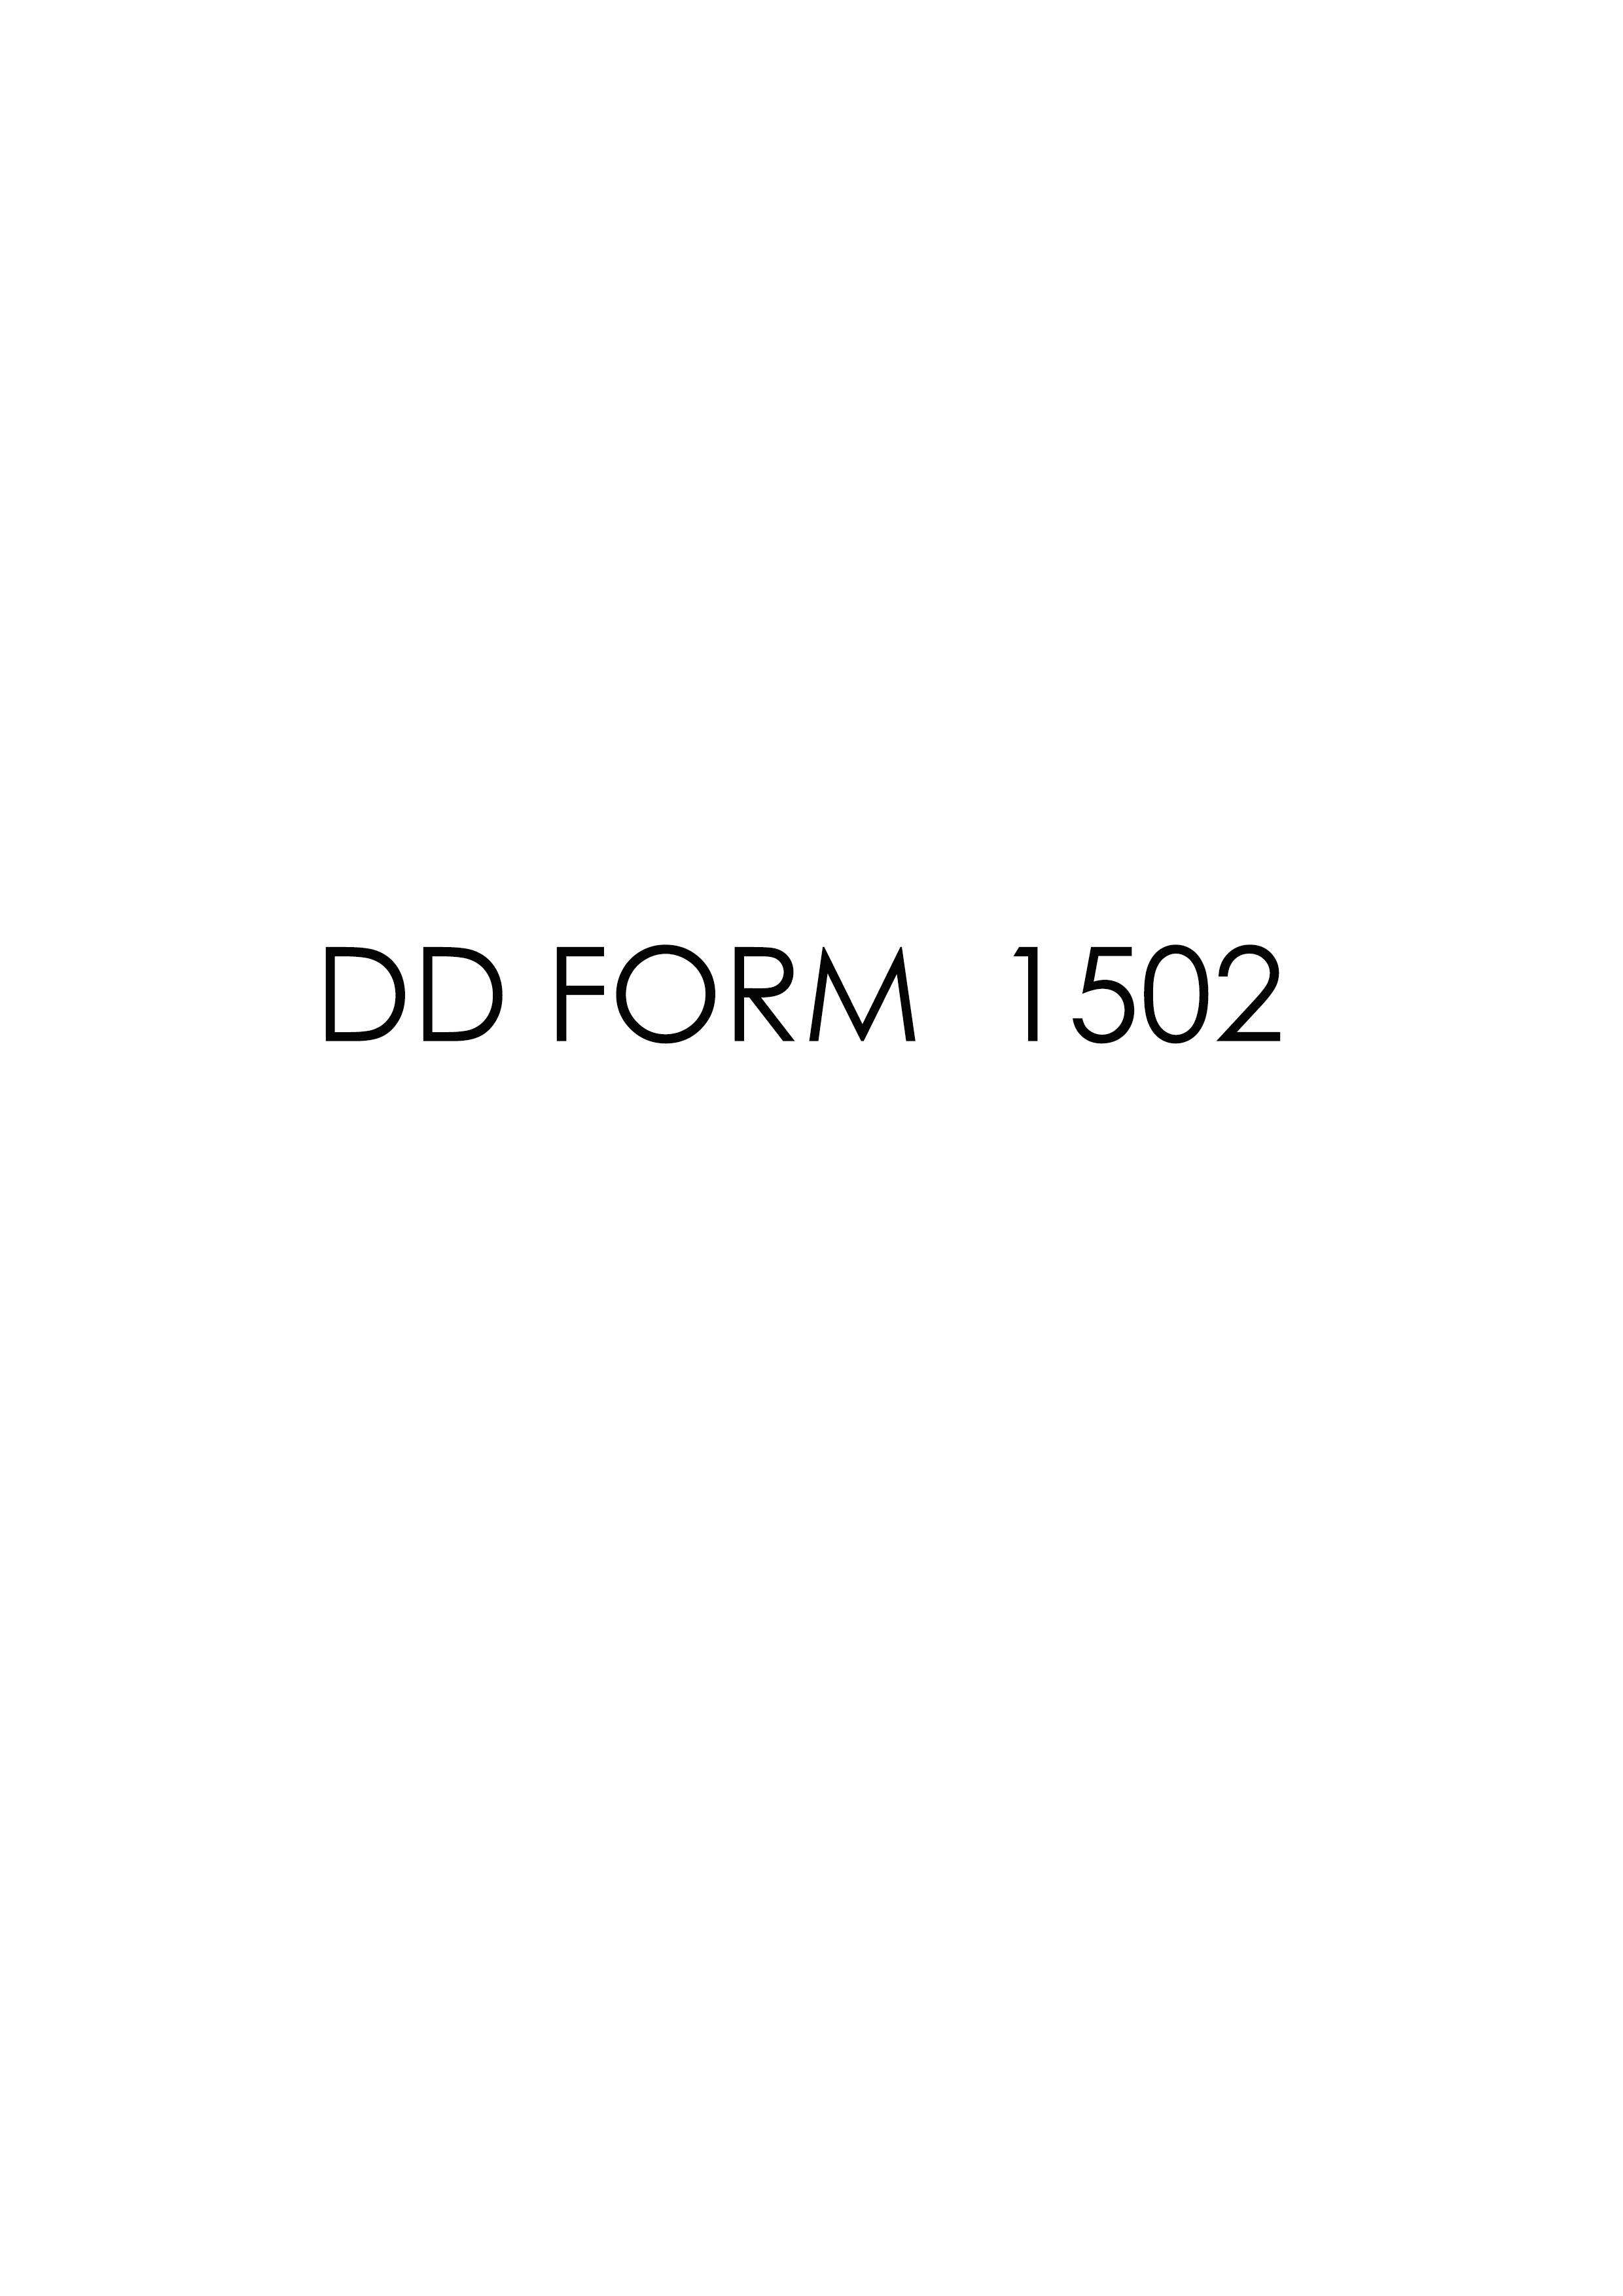 Download Fillable dd Form 1502